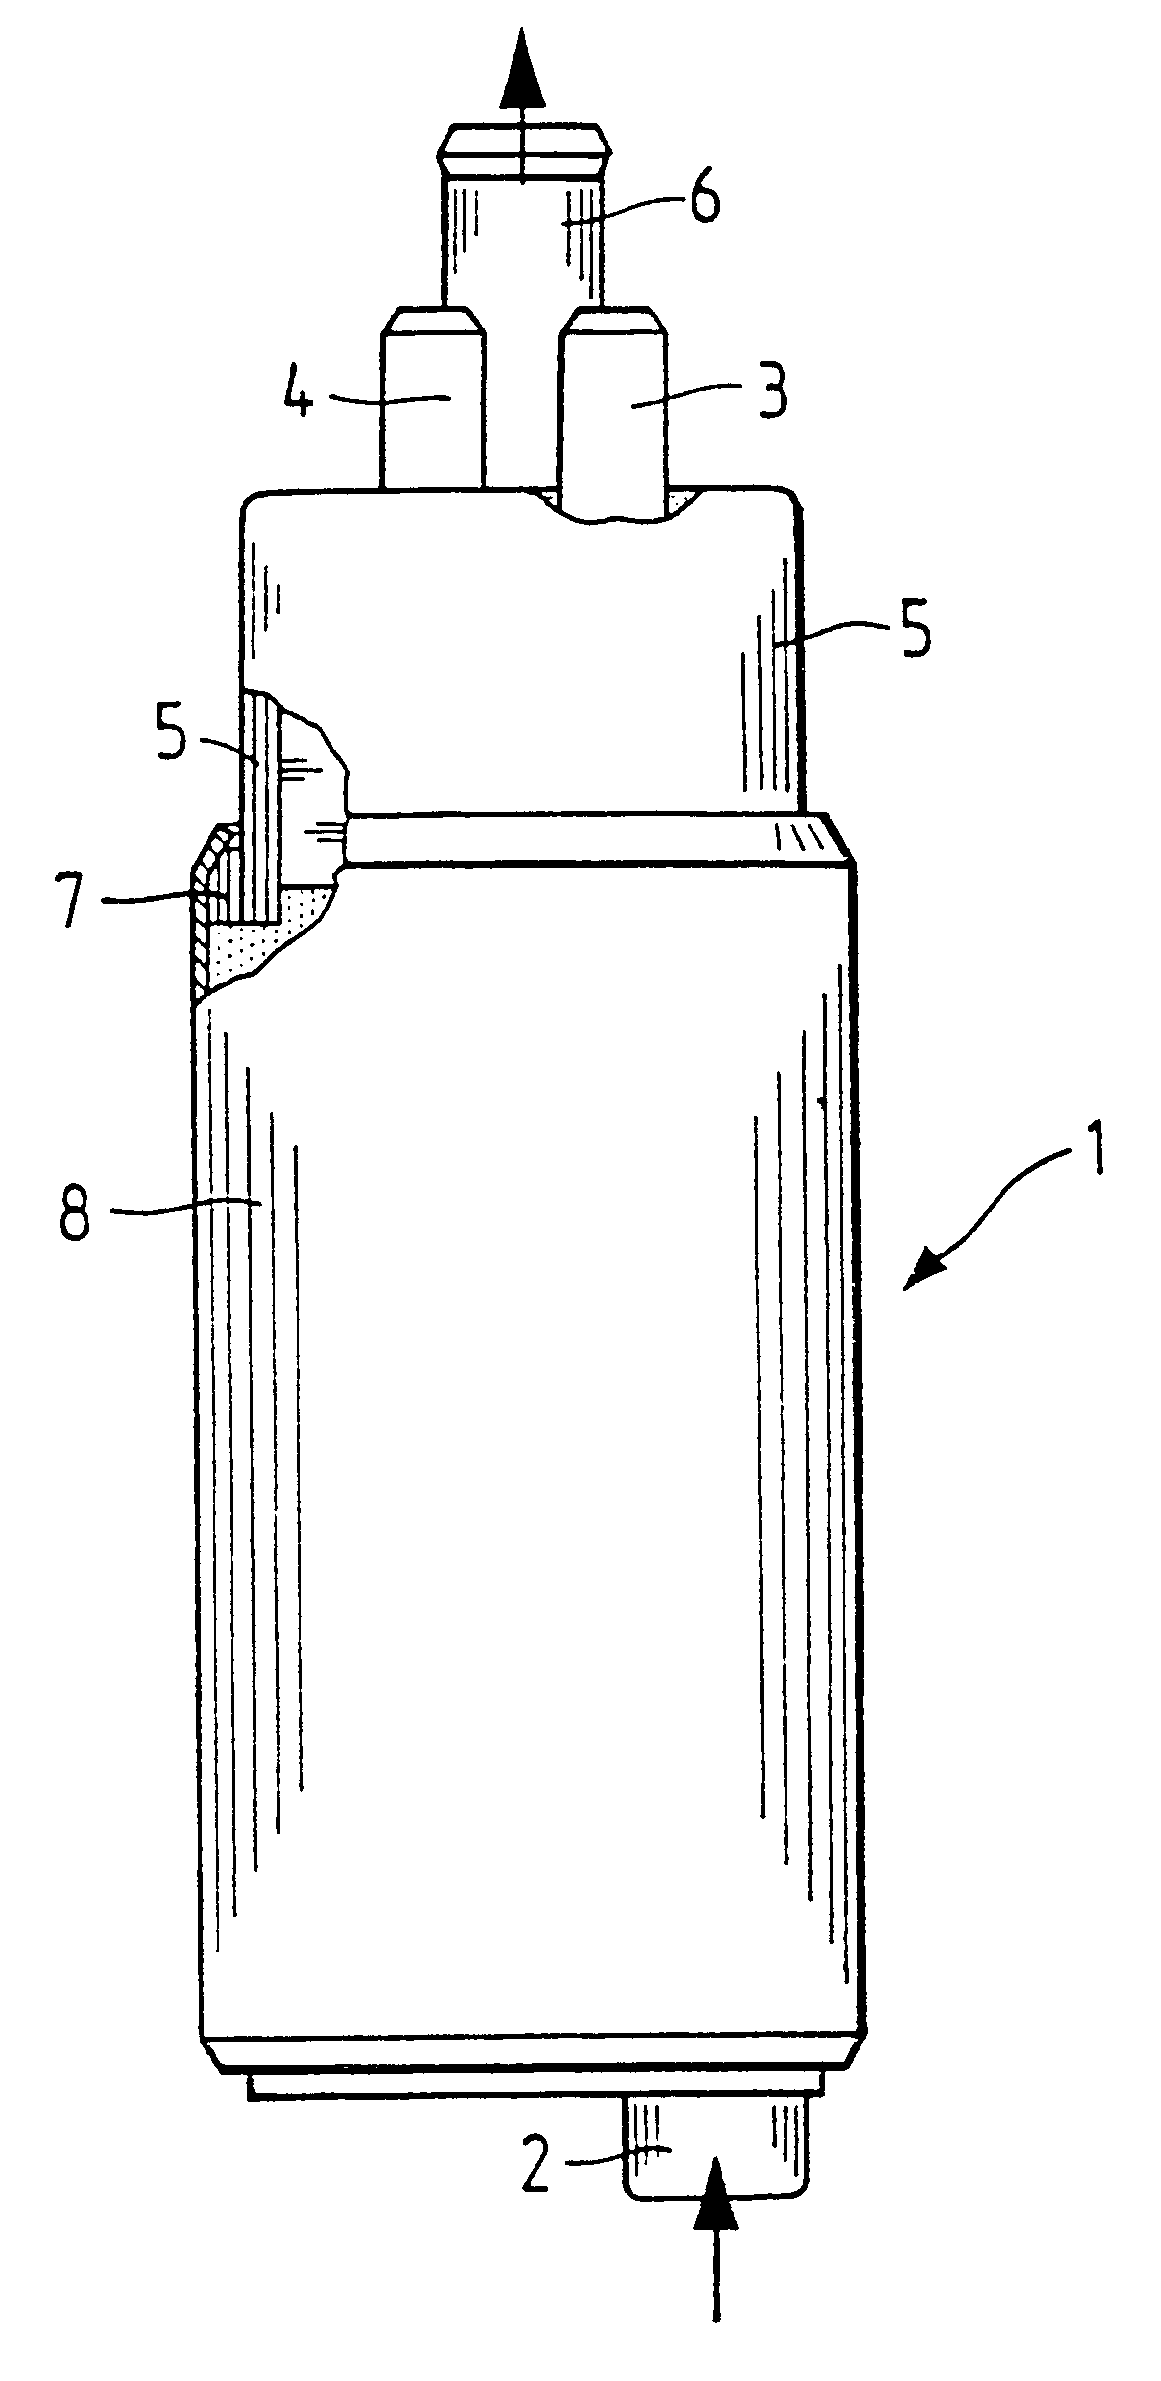 Housing for a fuel pump driven by an electric motor